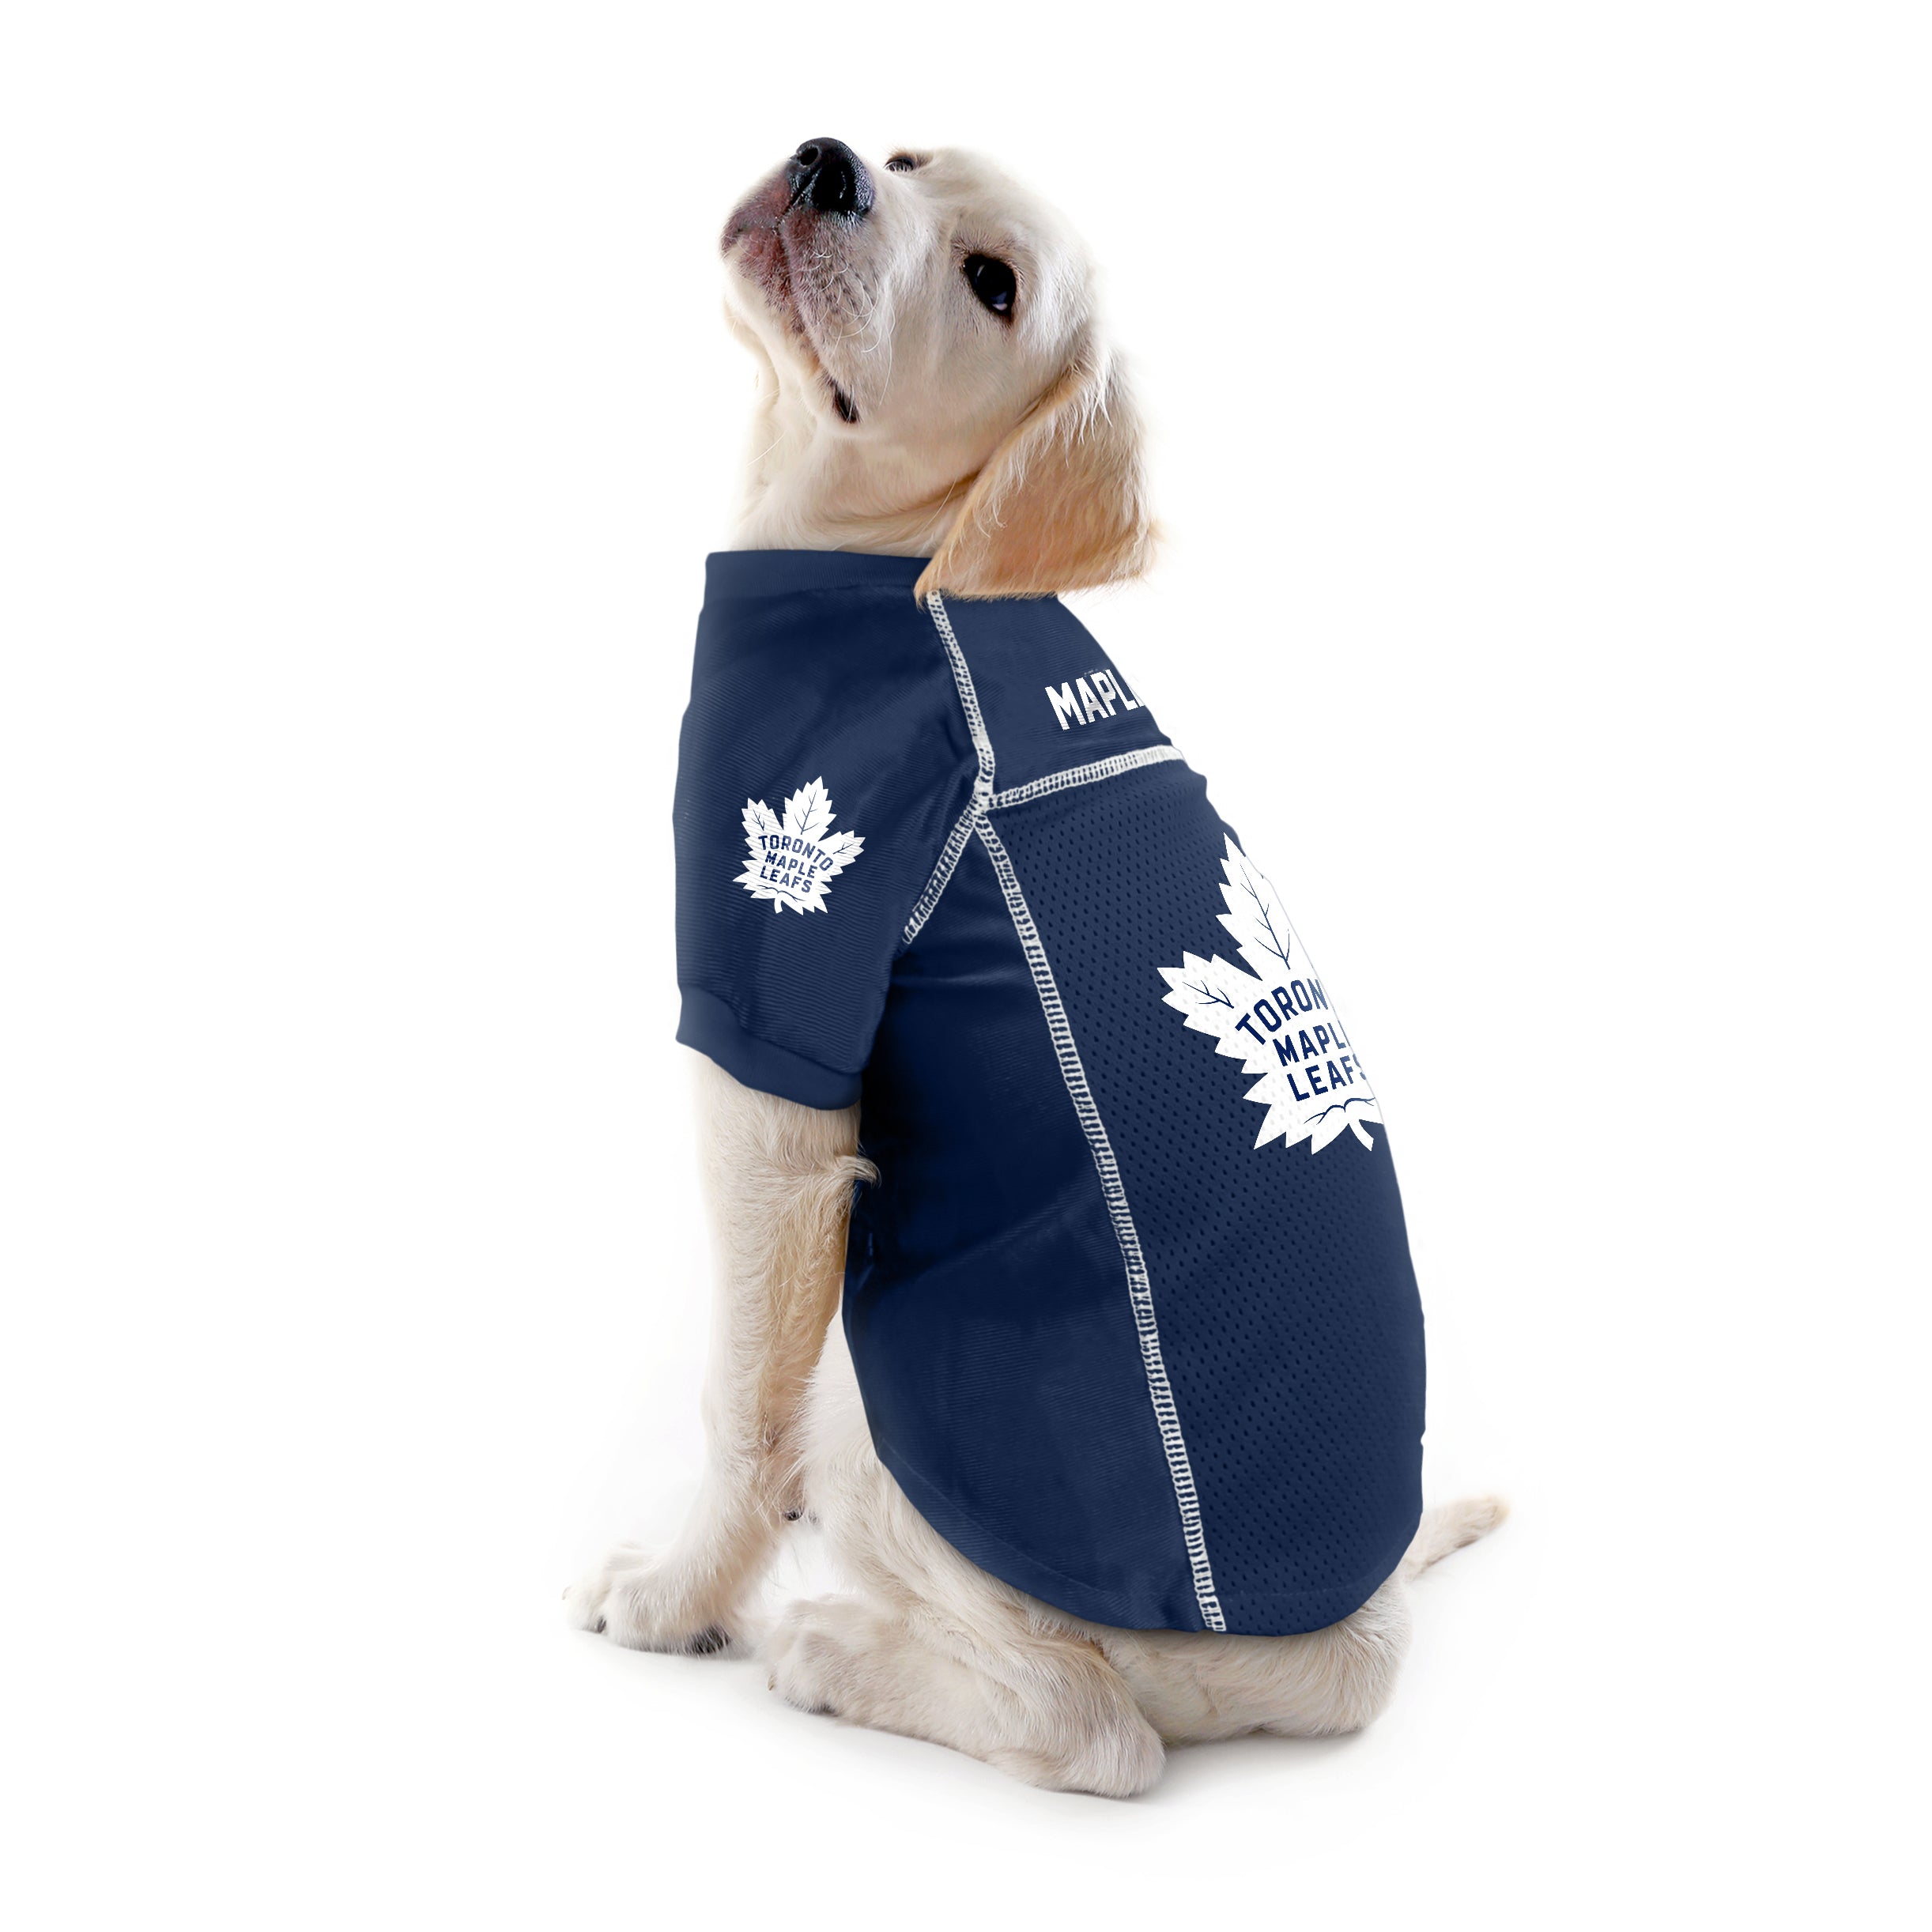 NHL Toronto Maple Leafs Jersey for Dogs & Cats, Small. - Let Your Pet be a  Real NHL Fan! (Pack of 2)